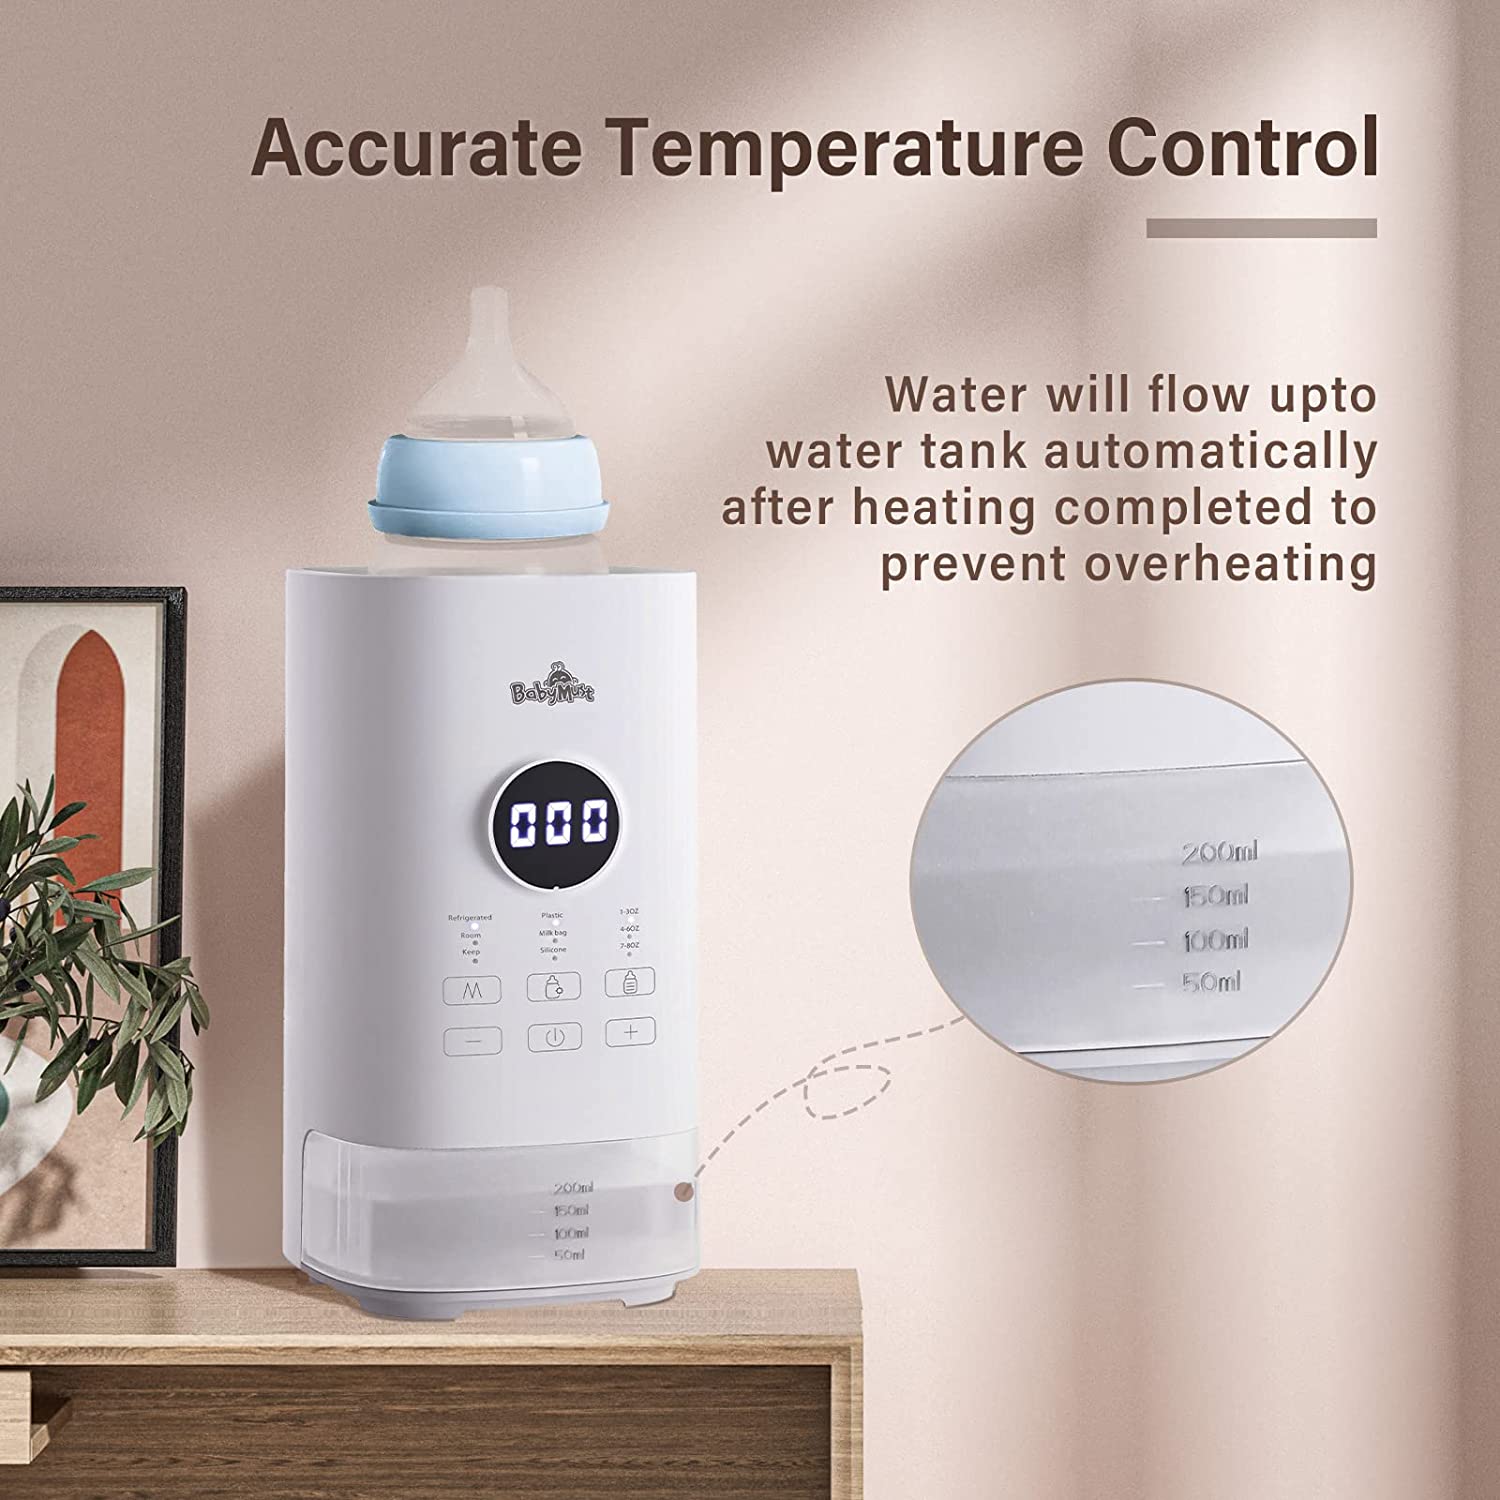 Momcozy Bottle Warmer, Fast Bottle Warmers for All Bottles with Timer,  Accurate Temperature Control and Automatic Shut-Off, Multifunctional Bottle